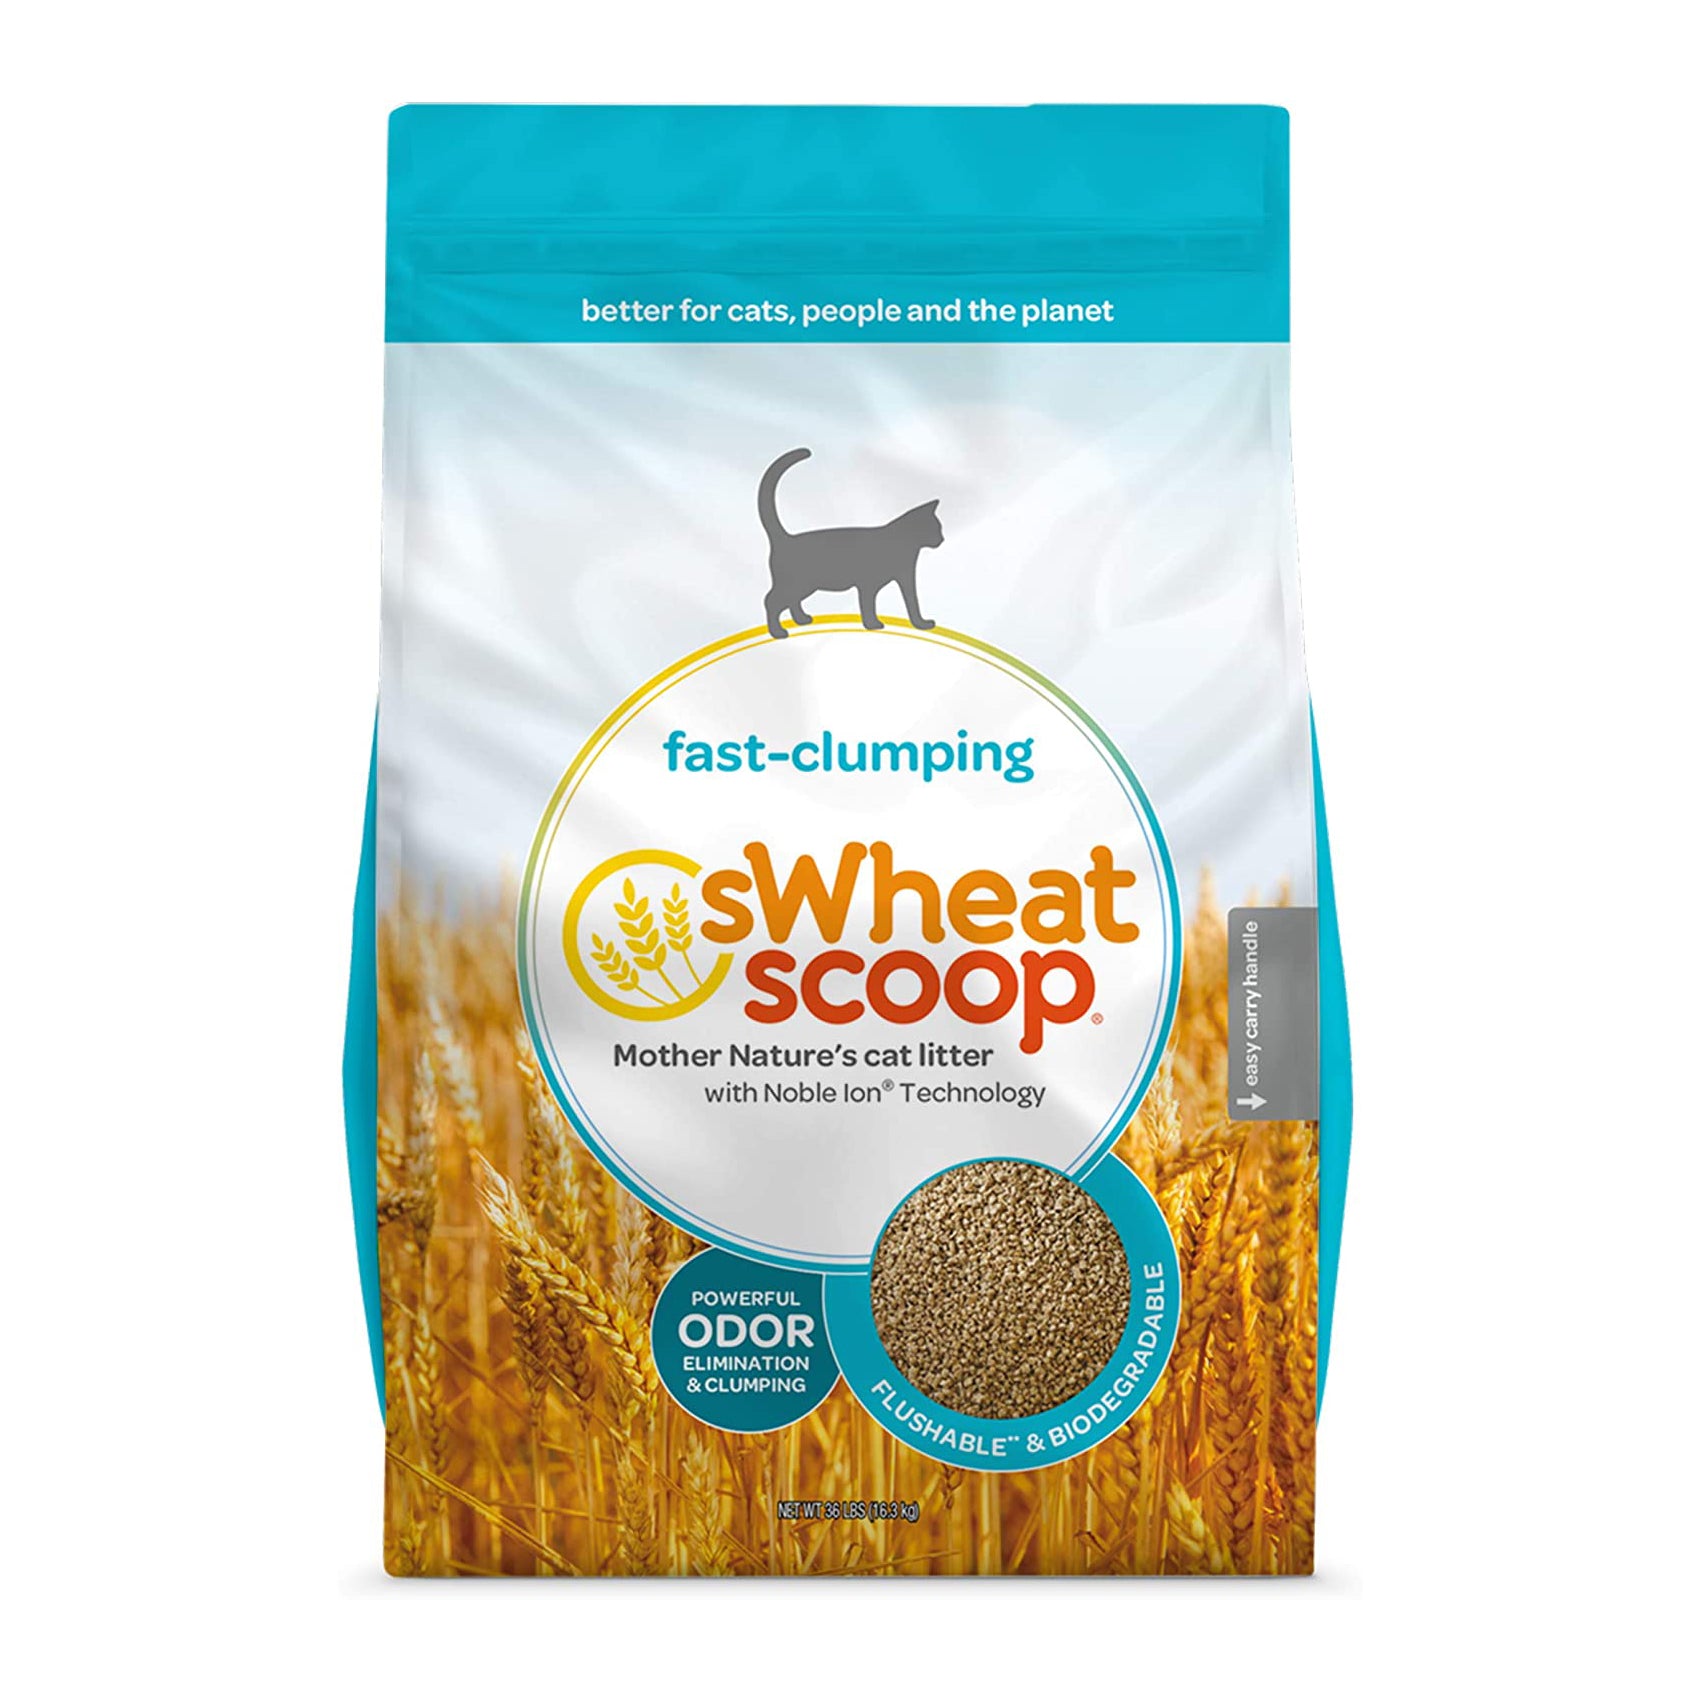 sWheat Scoop Fast-Clumping Cat Litter